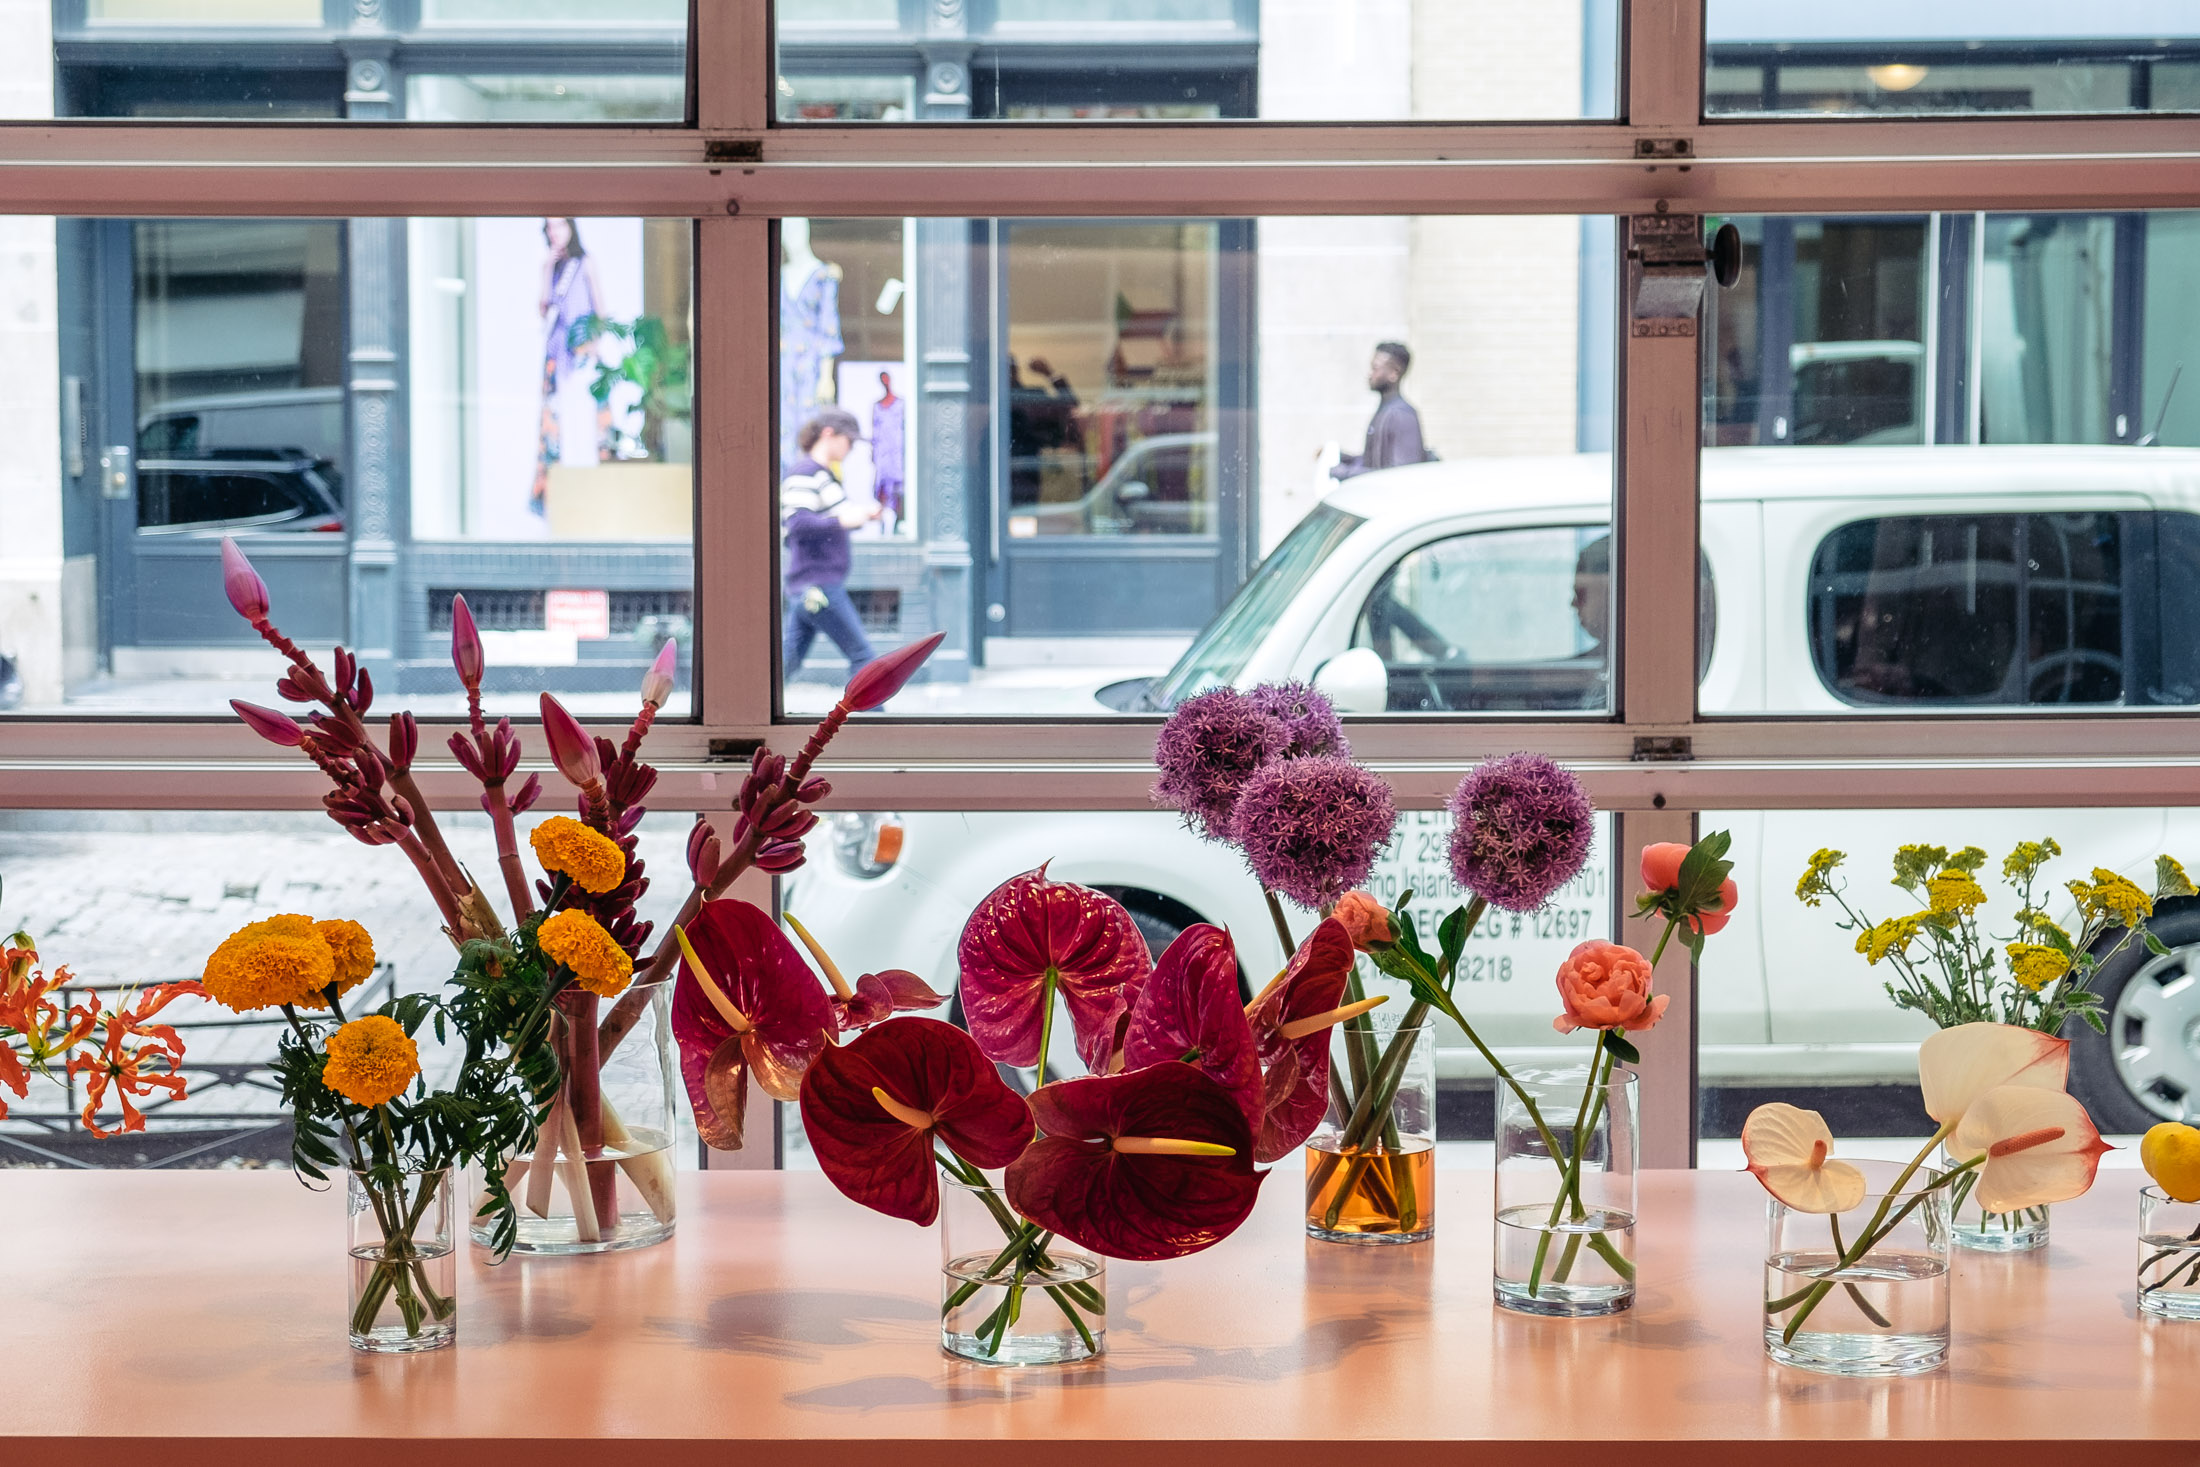 Flowers by Brrch Floral at the Mansur Gavriel Flower Shop in New York